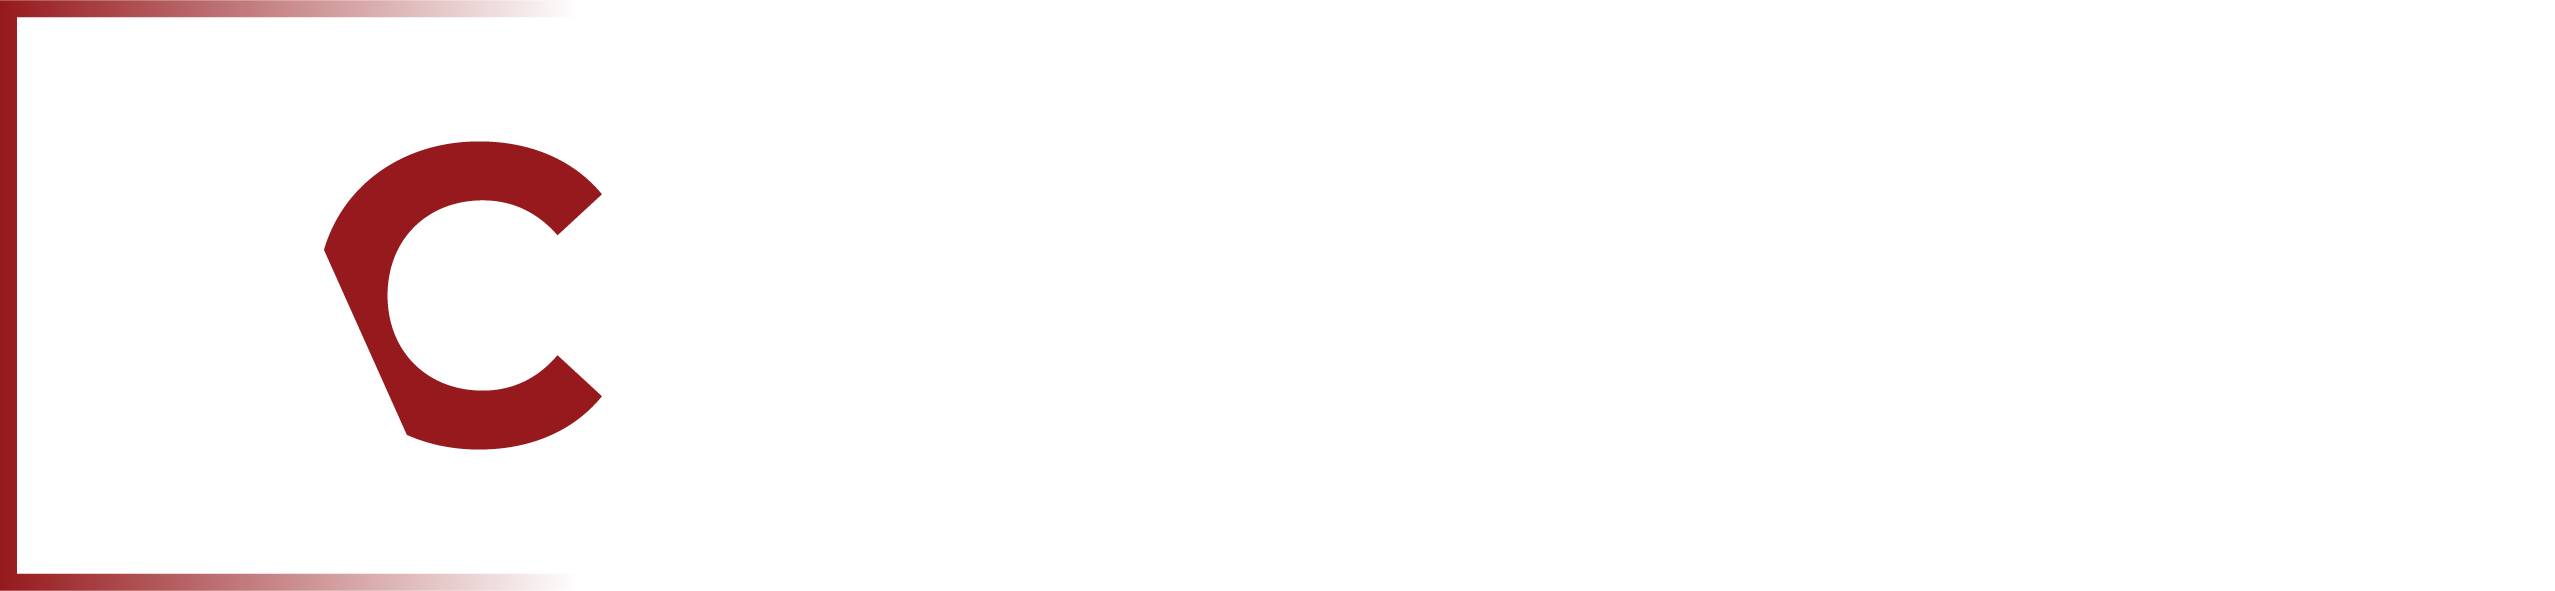 The AC Financial Network